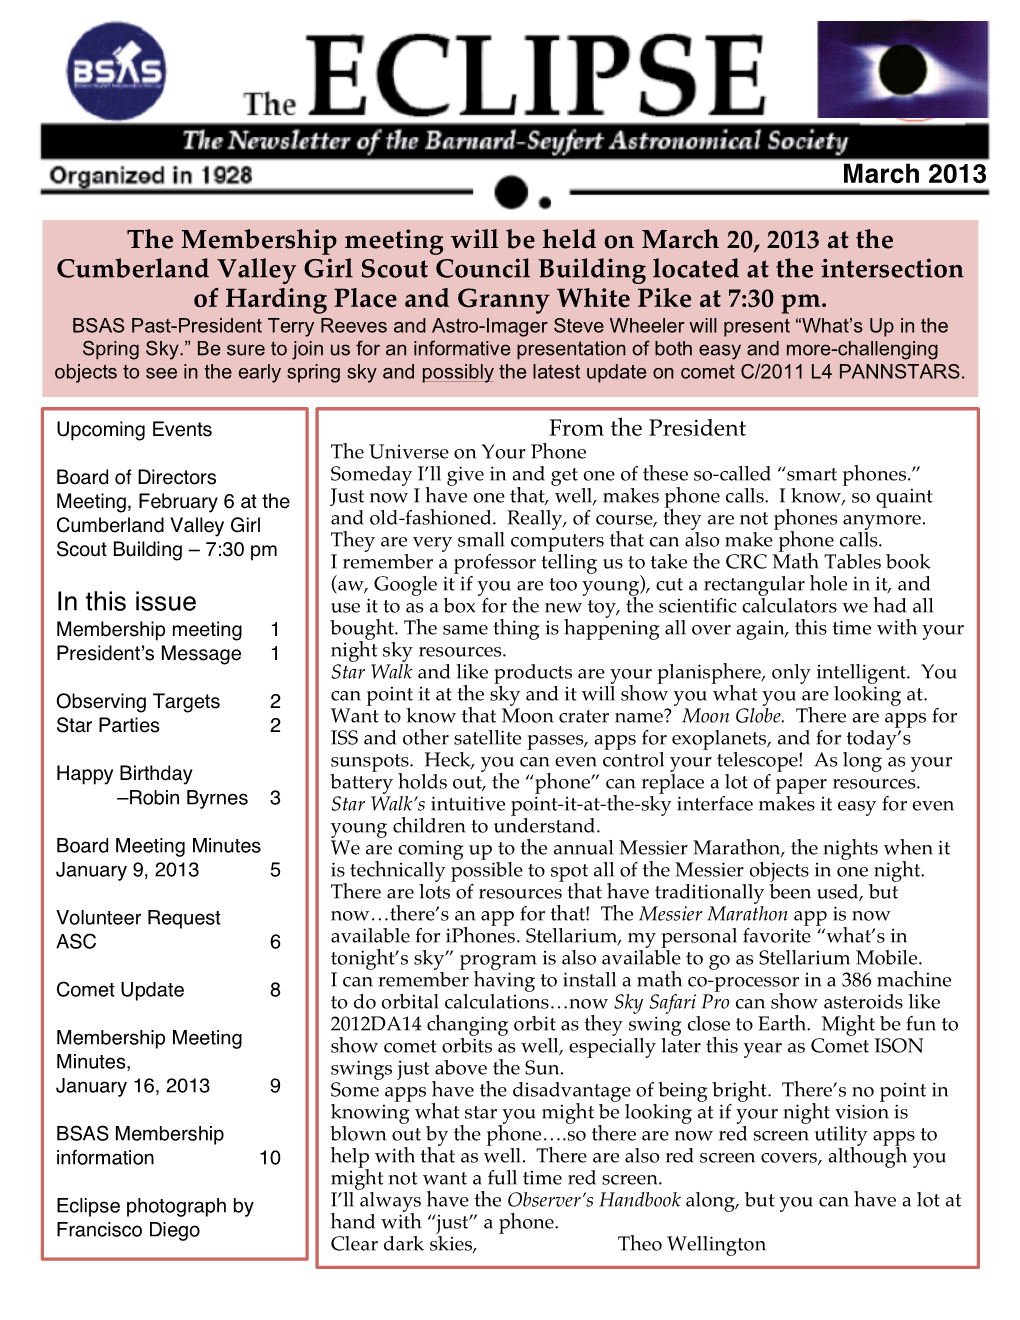 March 2013 in This Issue the Membership Meeting Will Be Held